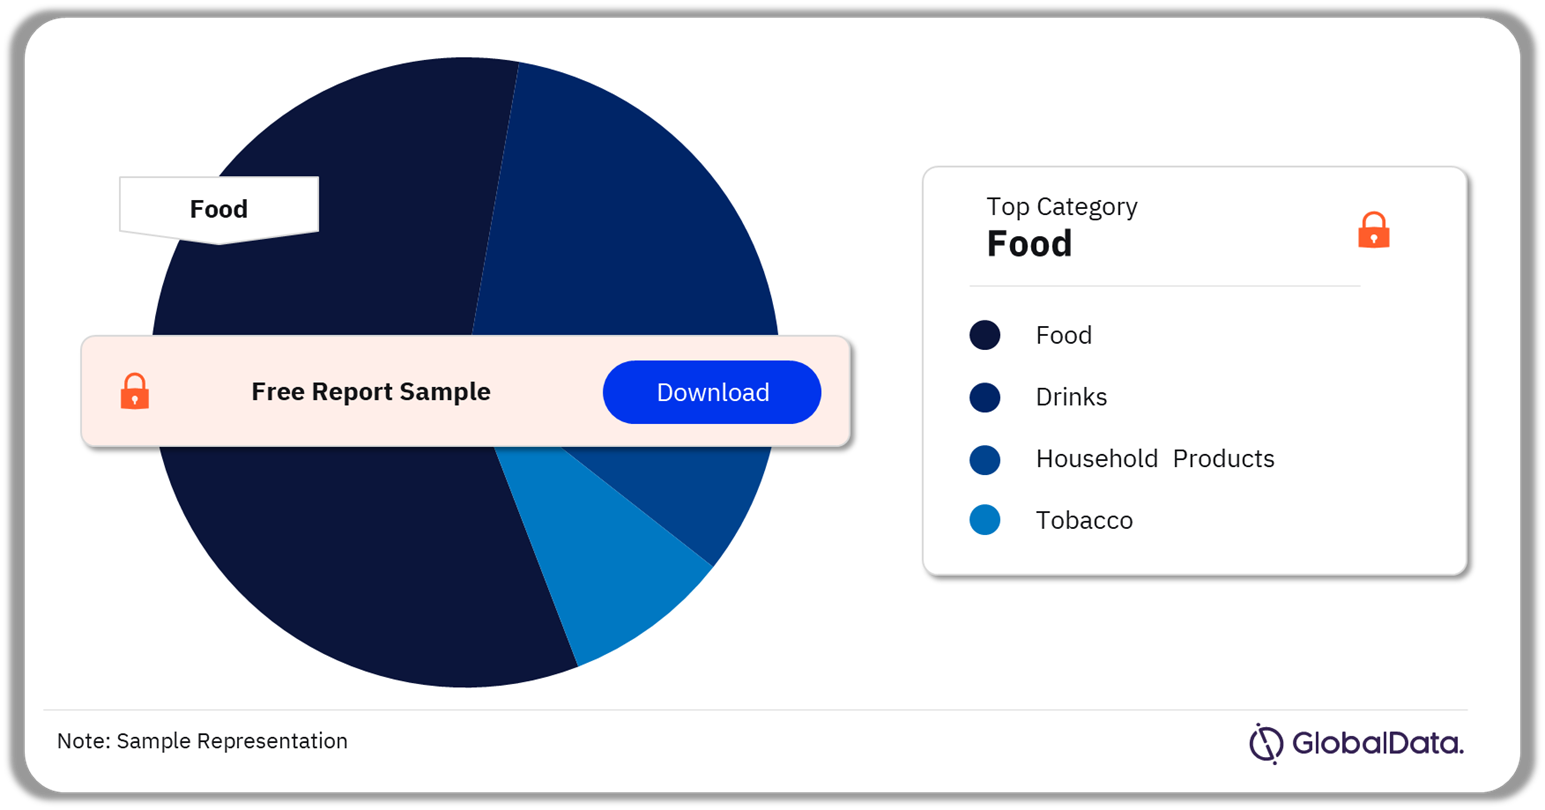 MEA Food and Grocery Sector Analysis by Categories, 2022 (%)